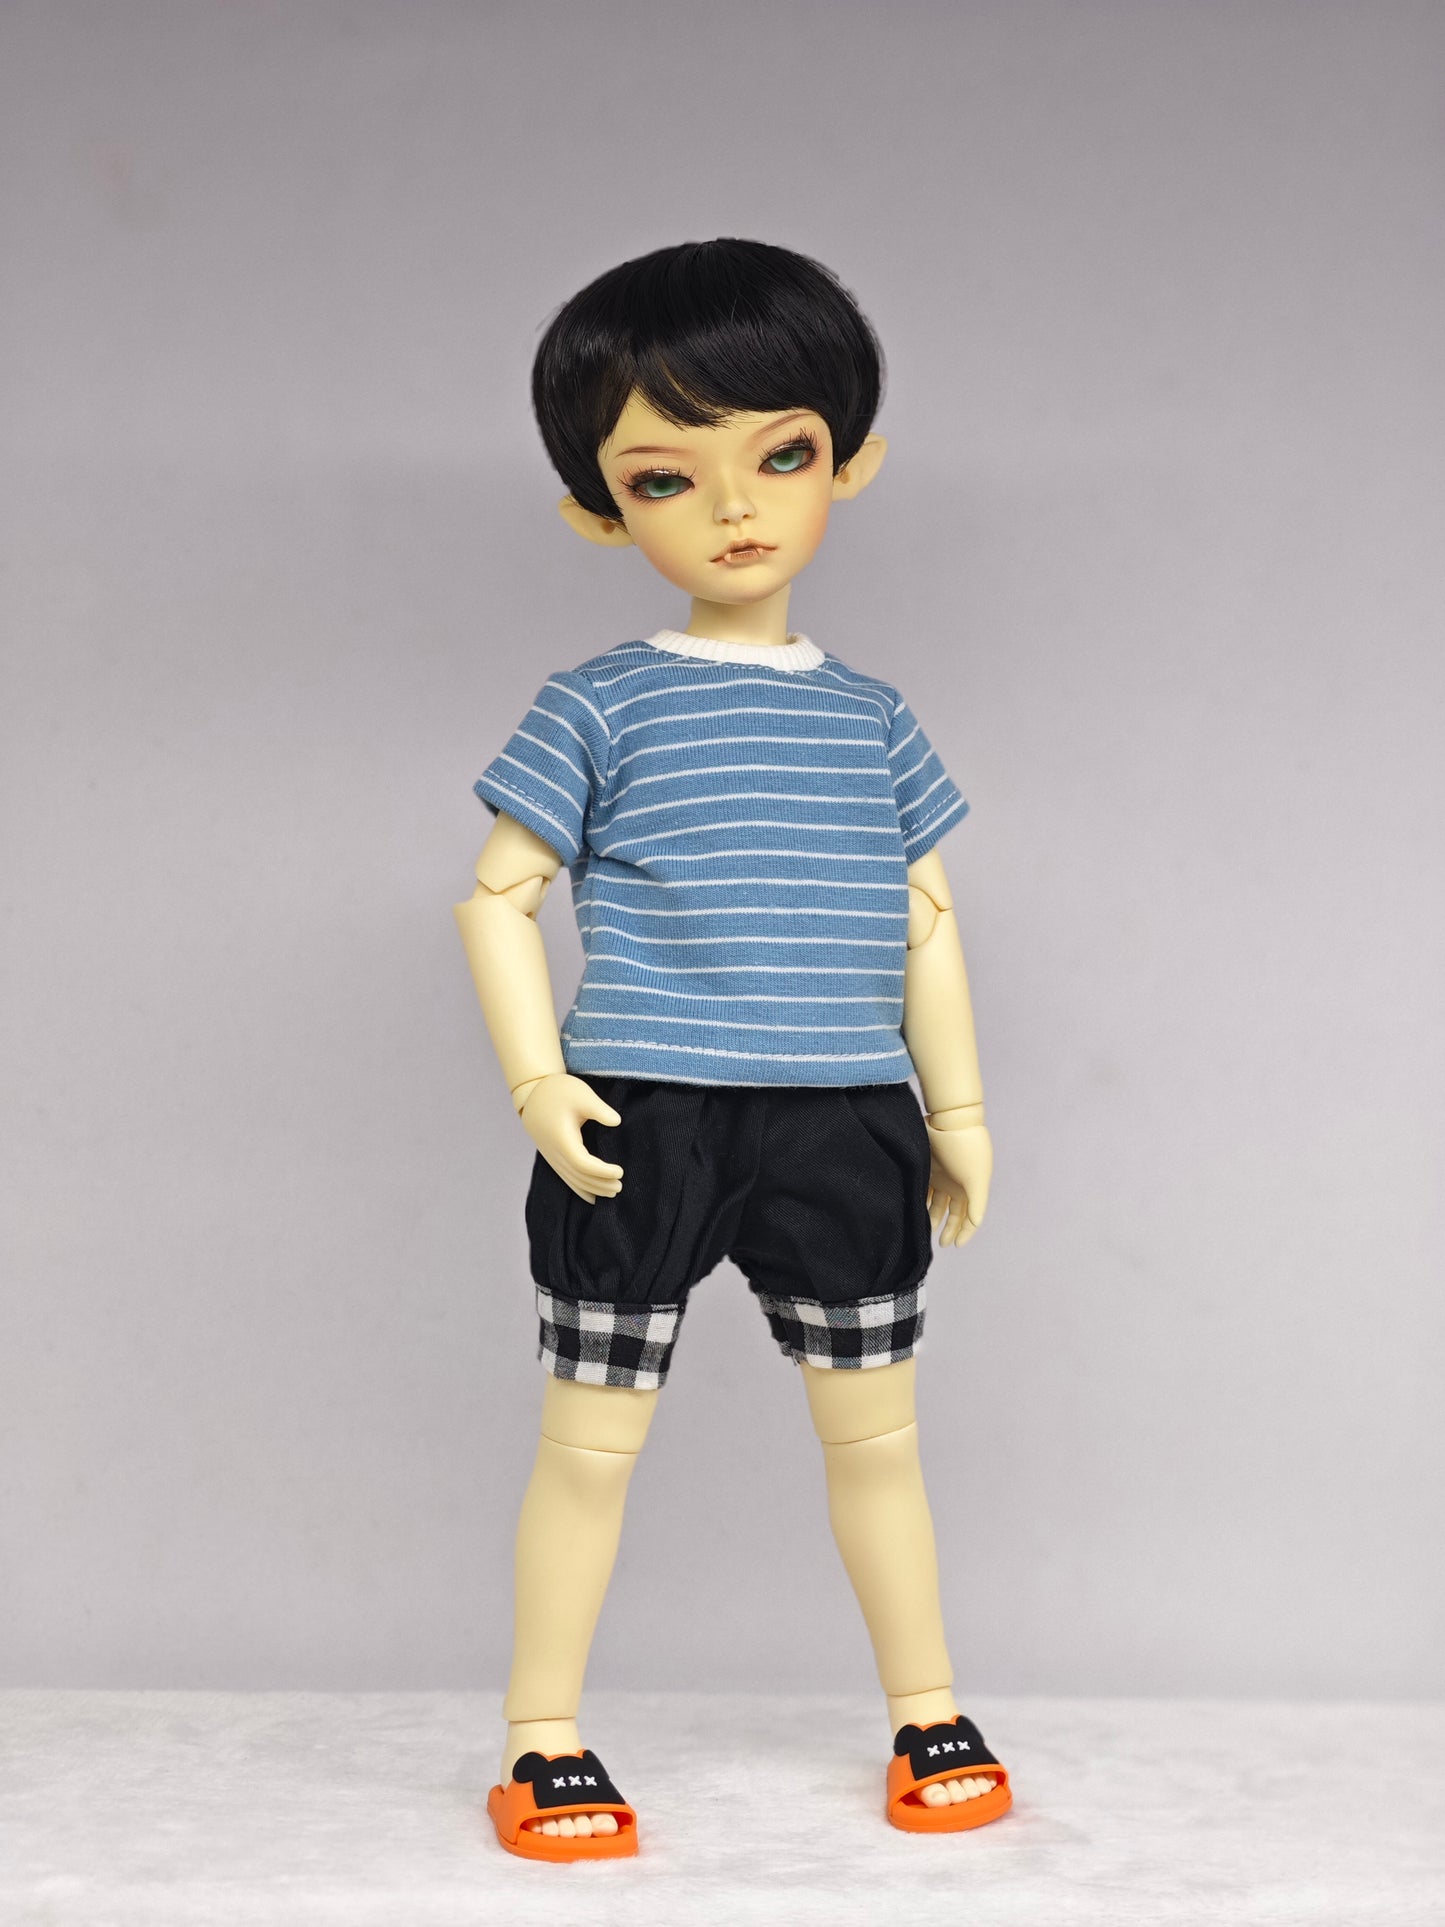 1/6 30cm boy doll Quintus in normal skin with makeup and fullset